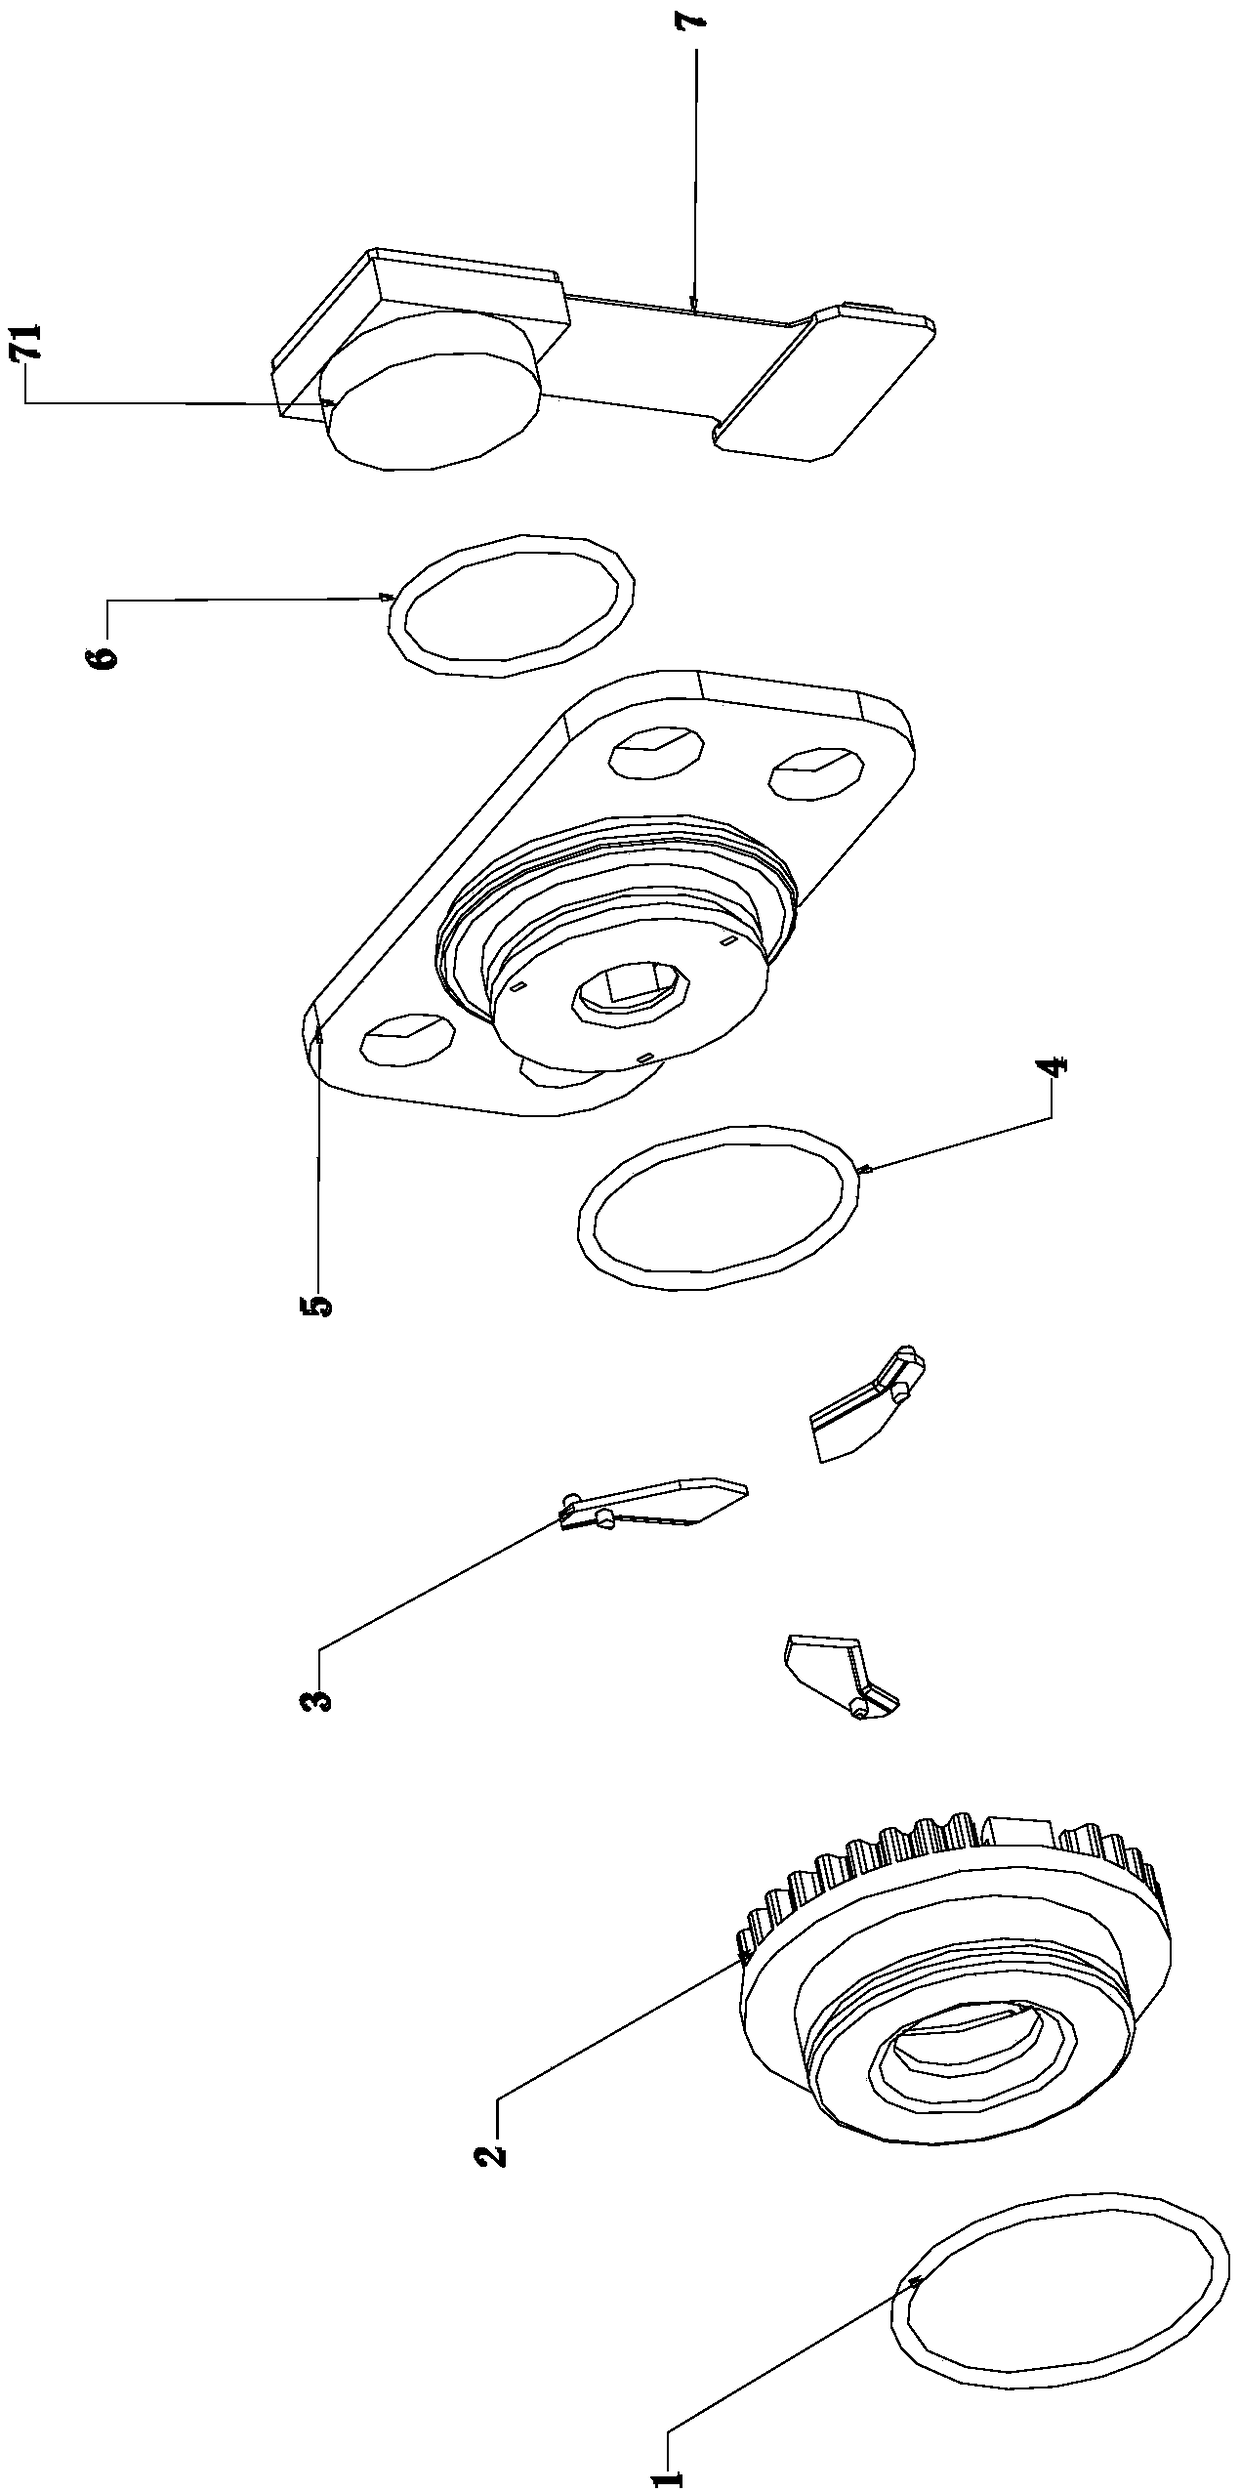 Head-mounted display equipment, camera module group, and lens shielding module for camera lens group